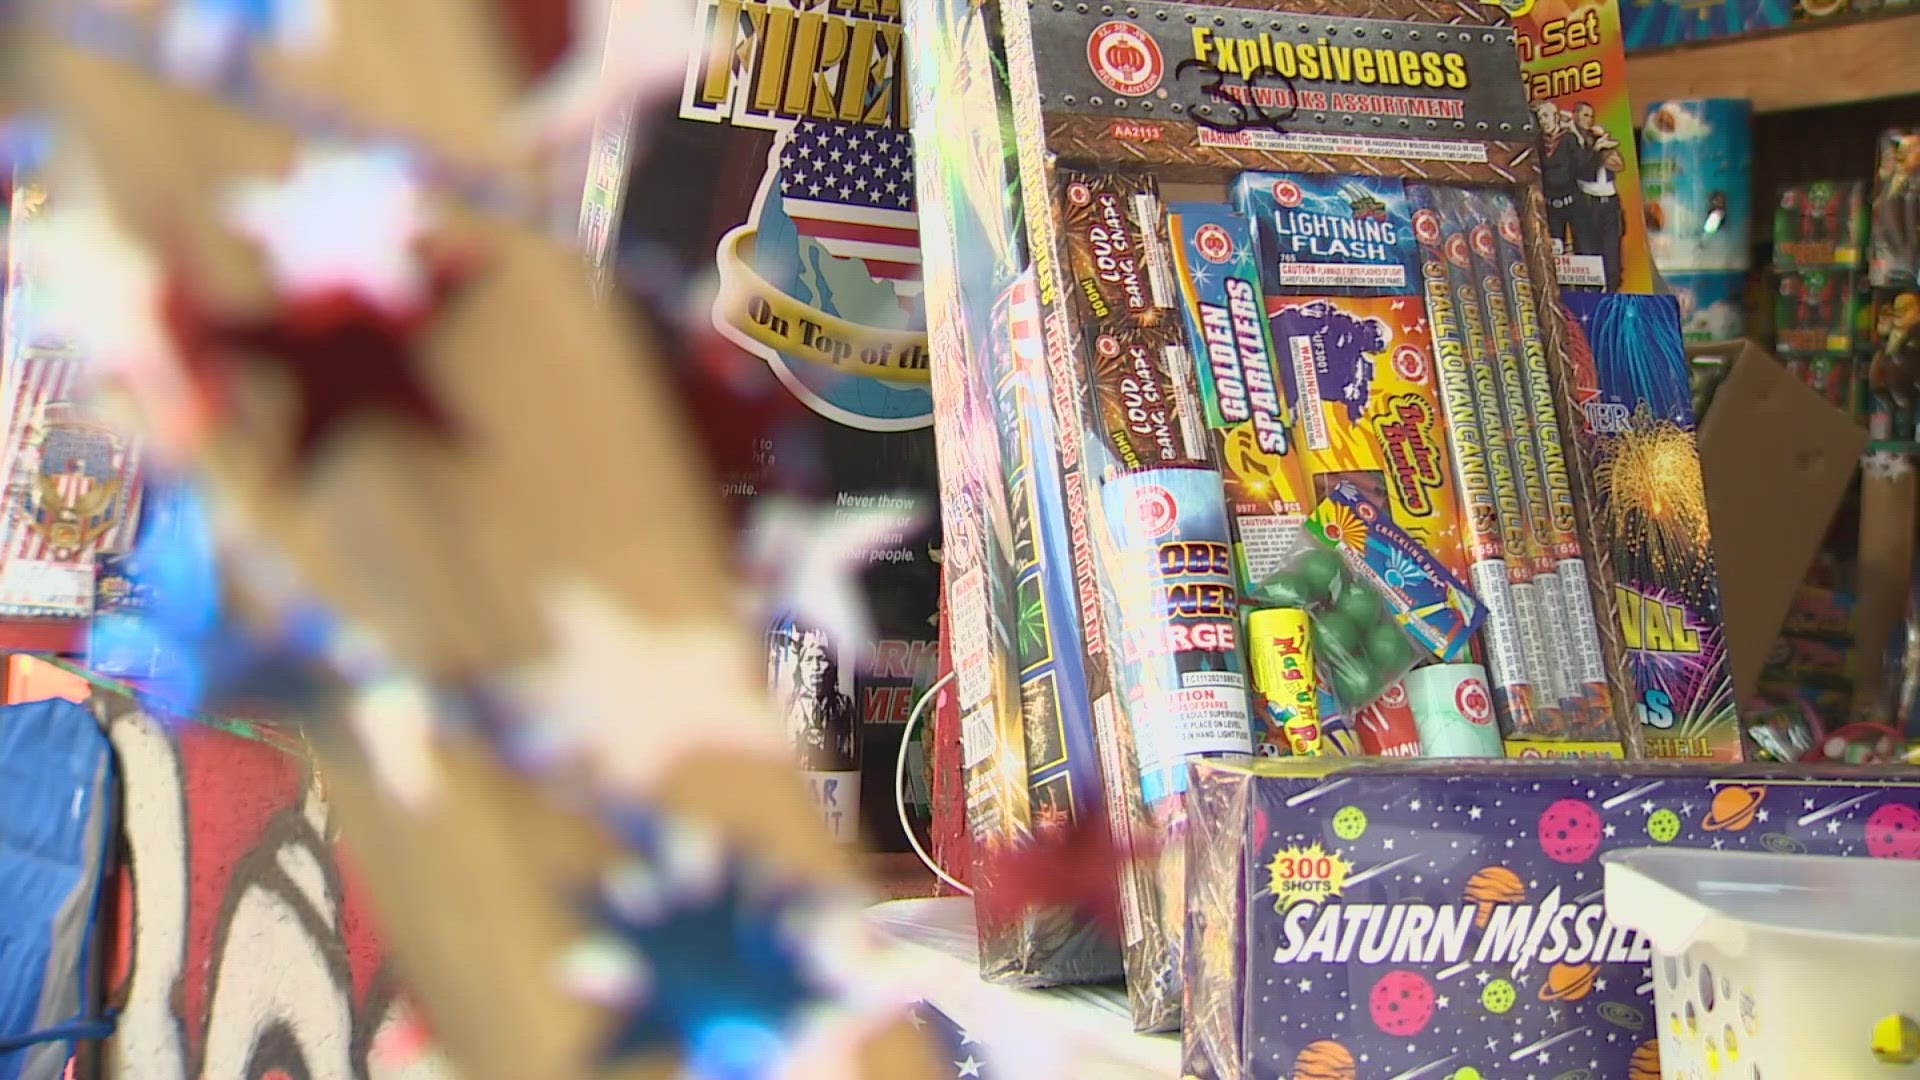 Emergency room staff say often people end up at the hospital for misusing fireworks or lighting them off while under the influence of drugs or alcohol.